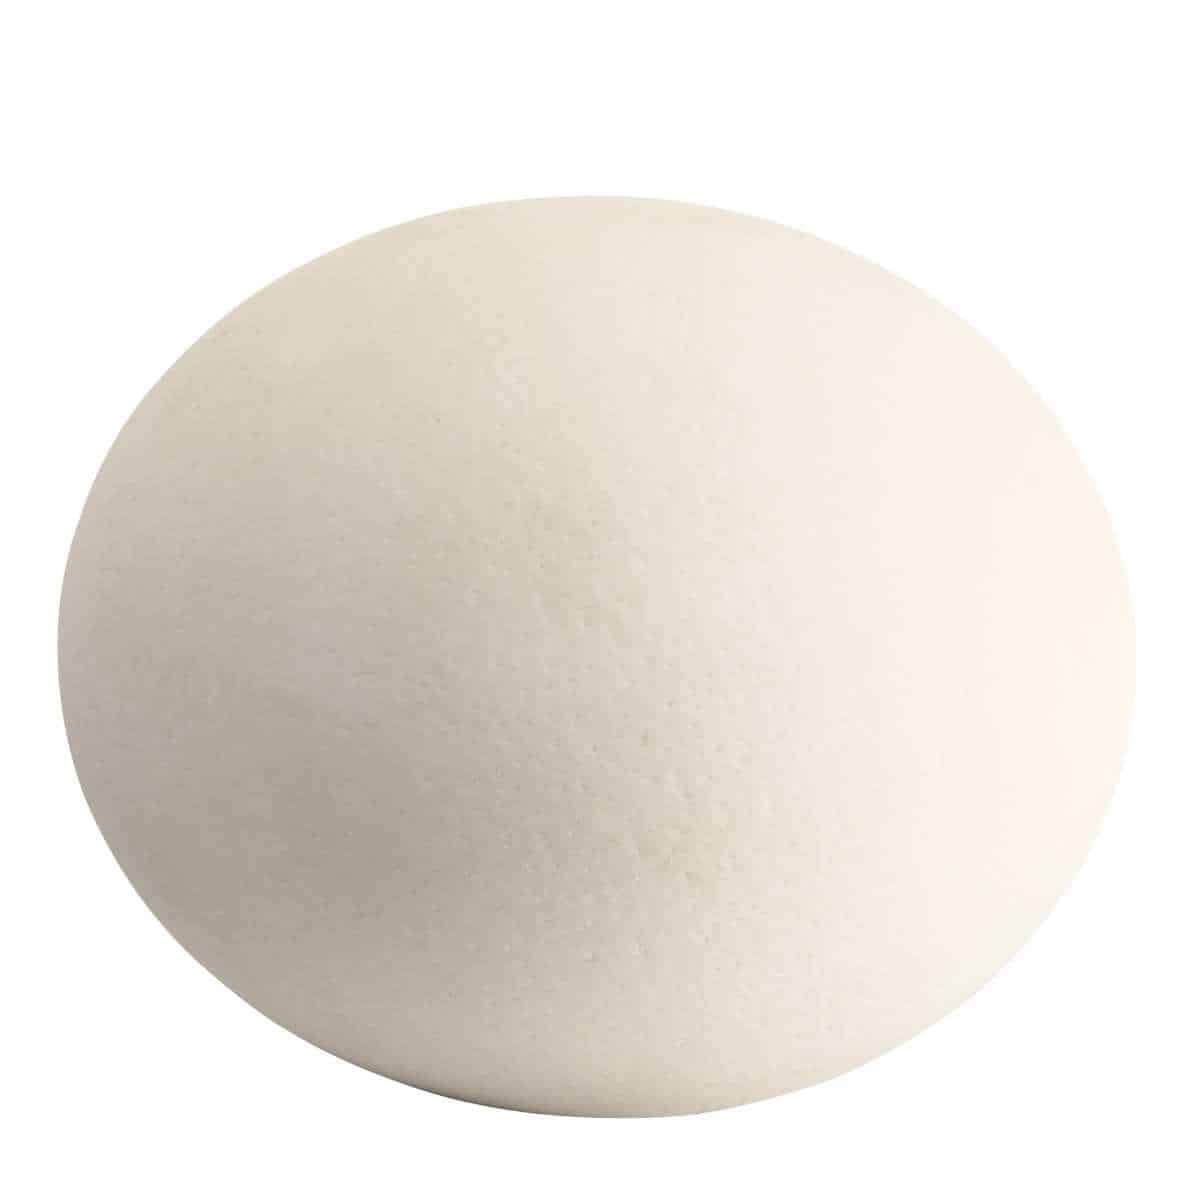 An ostrich egg on a white background.